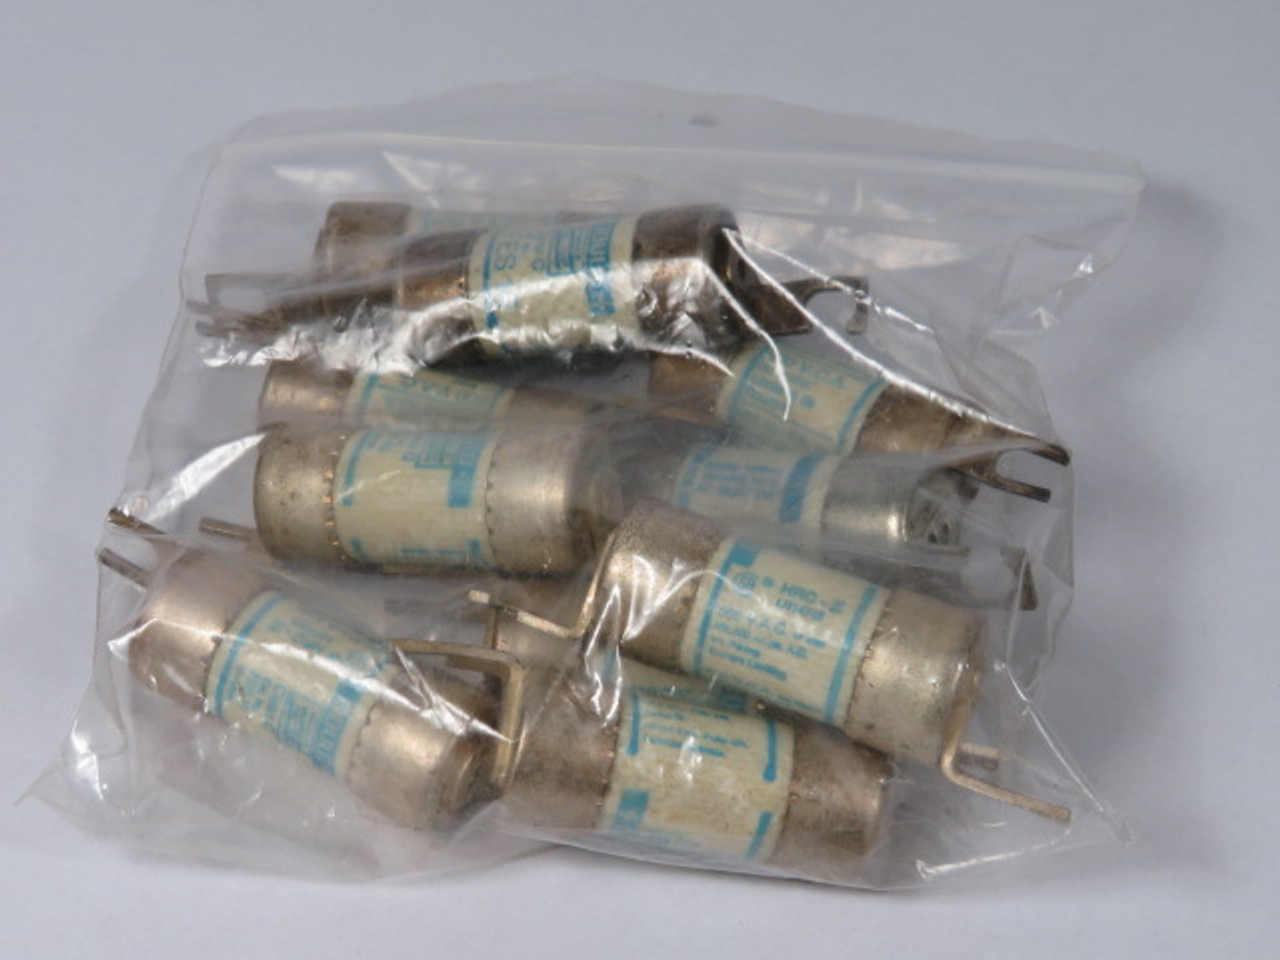 Gould FES10 Open Hole Current Limiting Fuse 10A 600V Lot of 10 USED